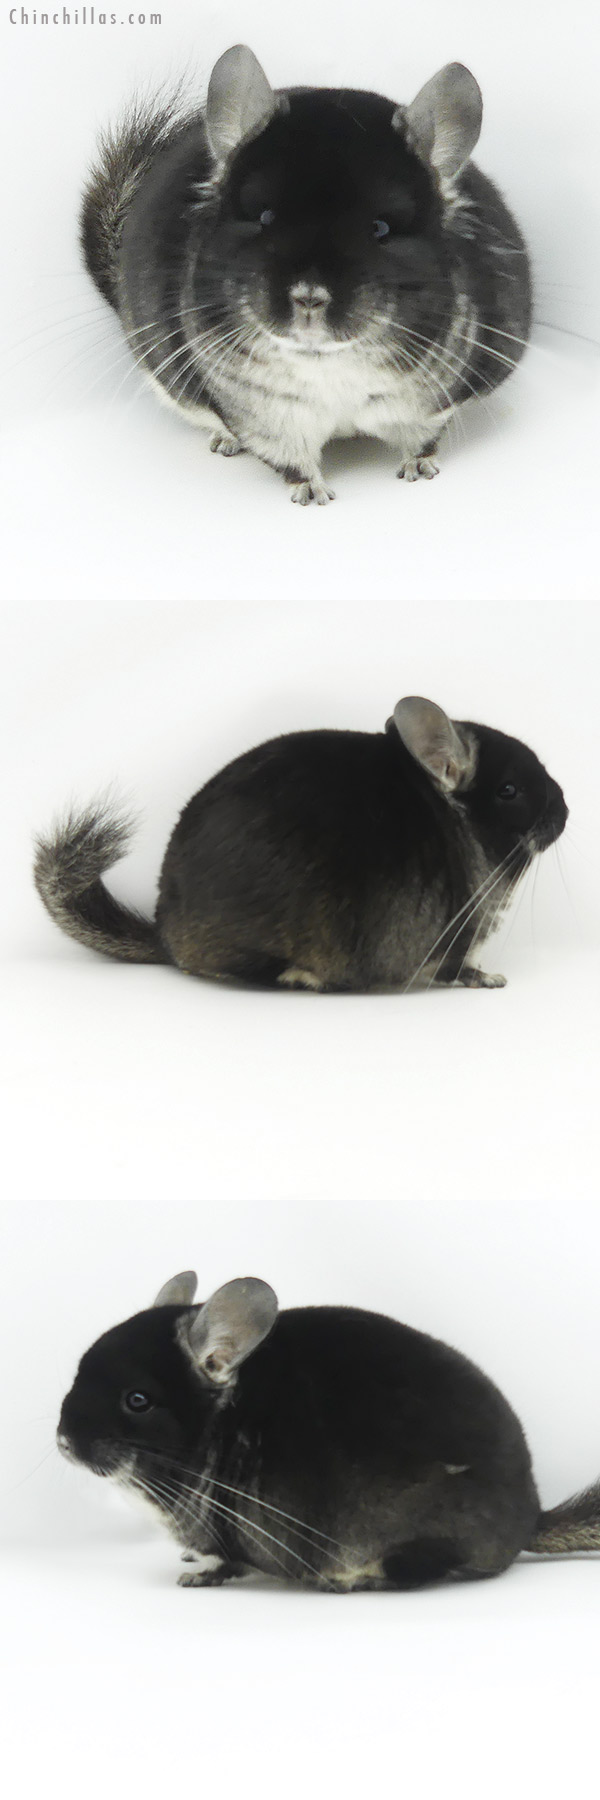 Chinchilla or related item offered for sale or export on Chinchillas.com - 19373 Exceptional Blocky Mini Black Velvet Male Chinchilla